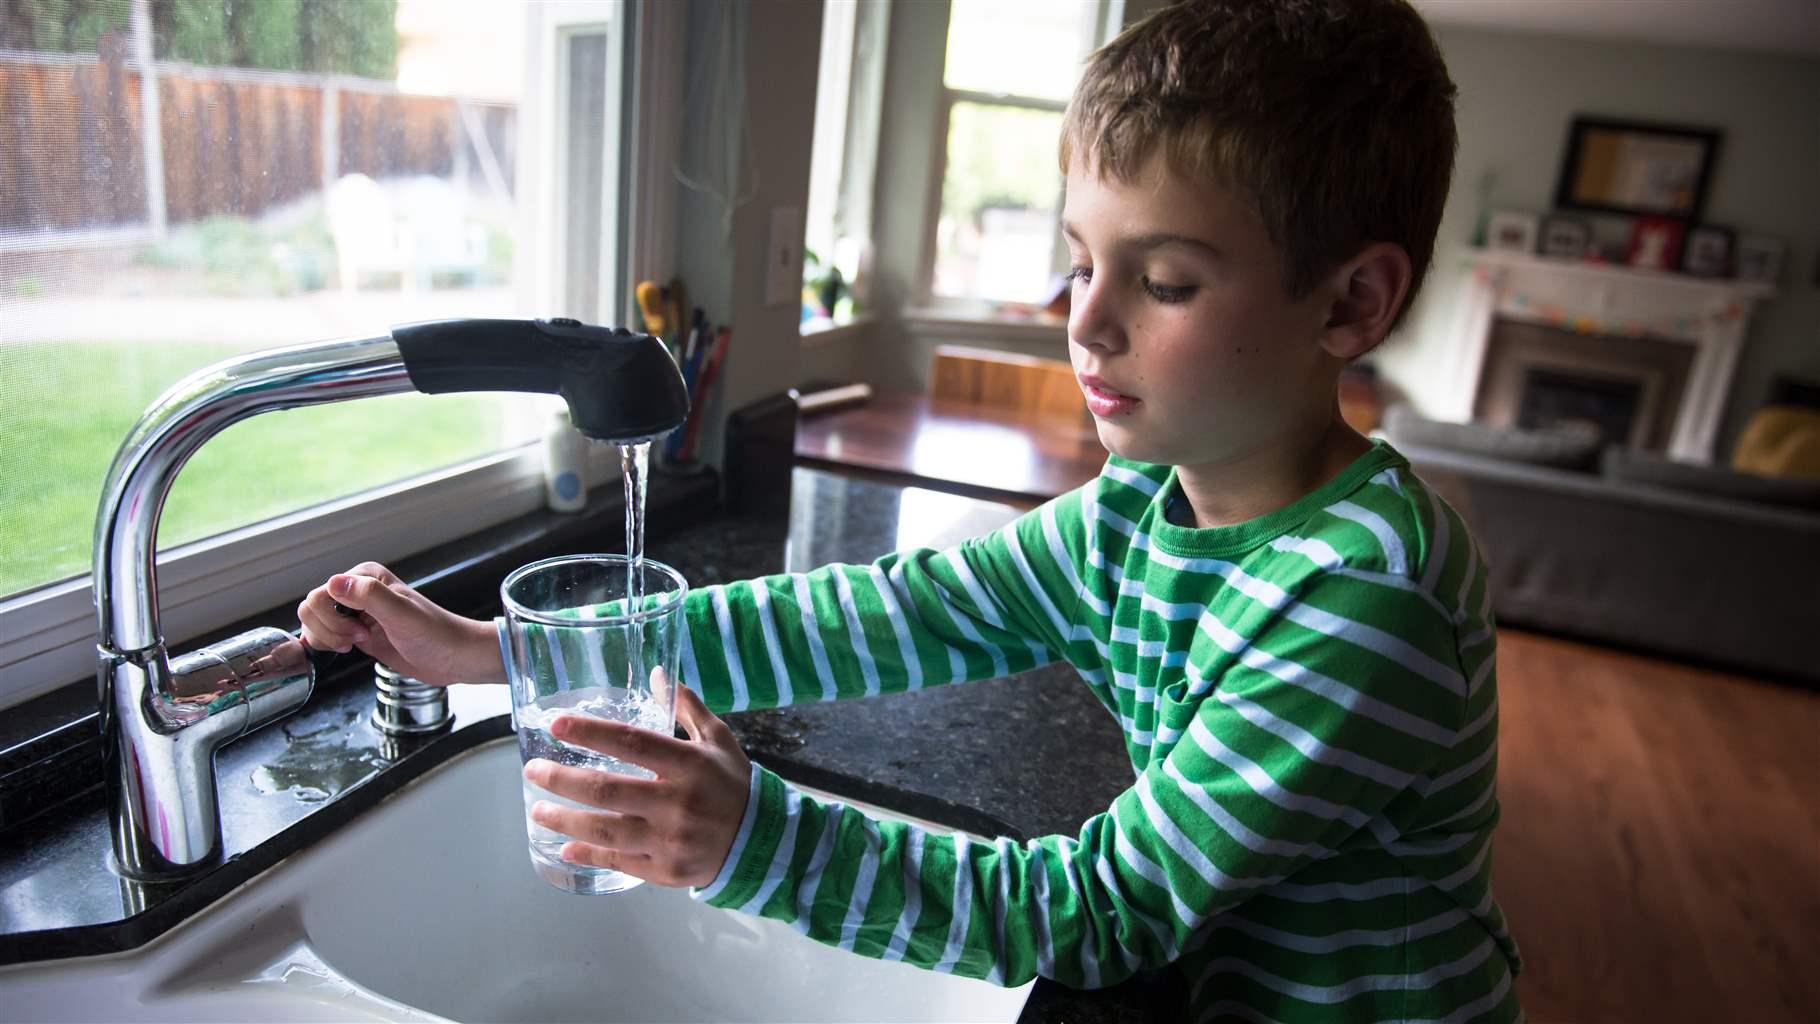 Boy turning off the tap after getting water from the kitchen sink.